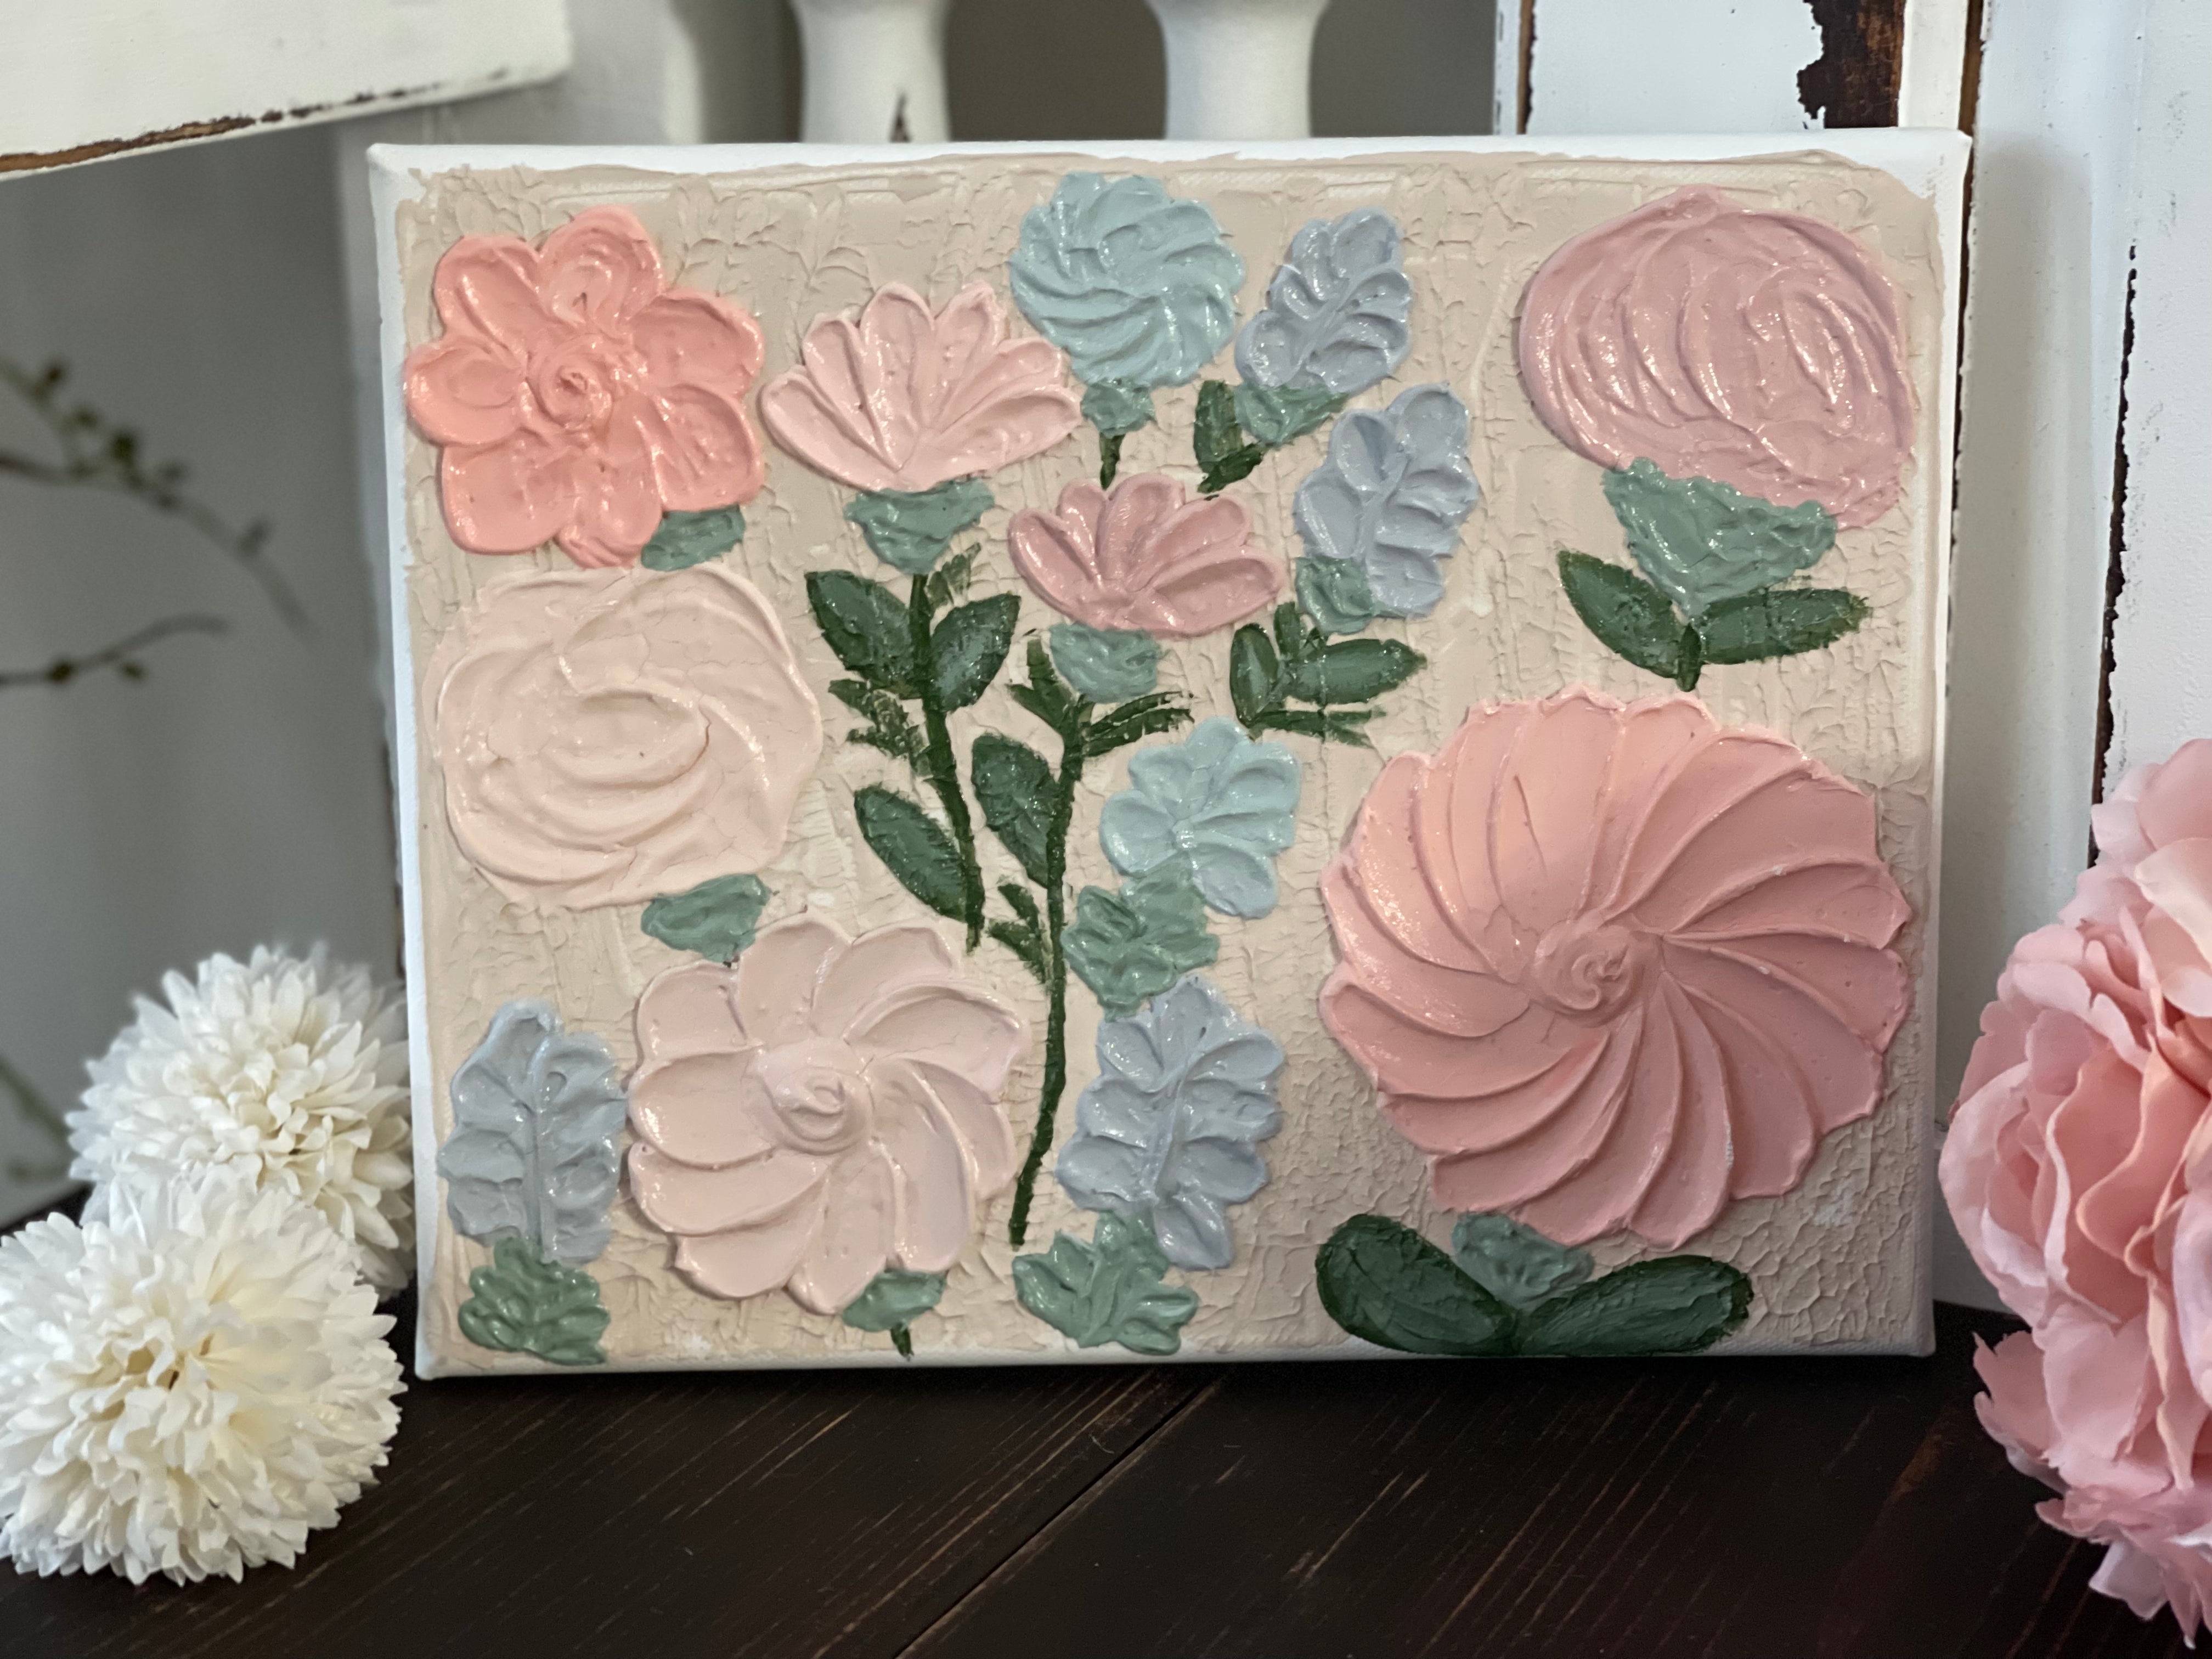 This beautiful design has 12 flowers adorning the canvas.  Bright pink, mauve, peach, and baby blue with greenery make this sign pop.  